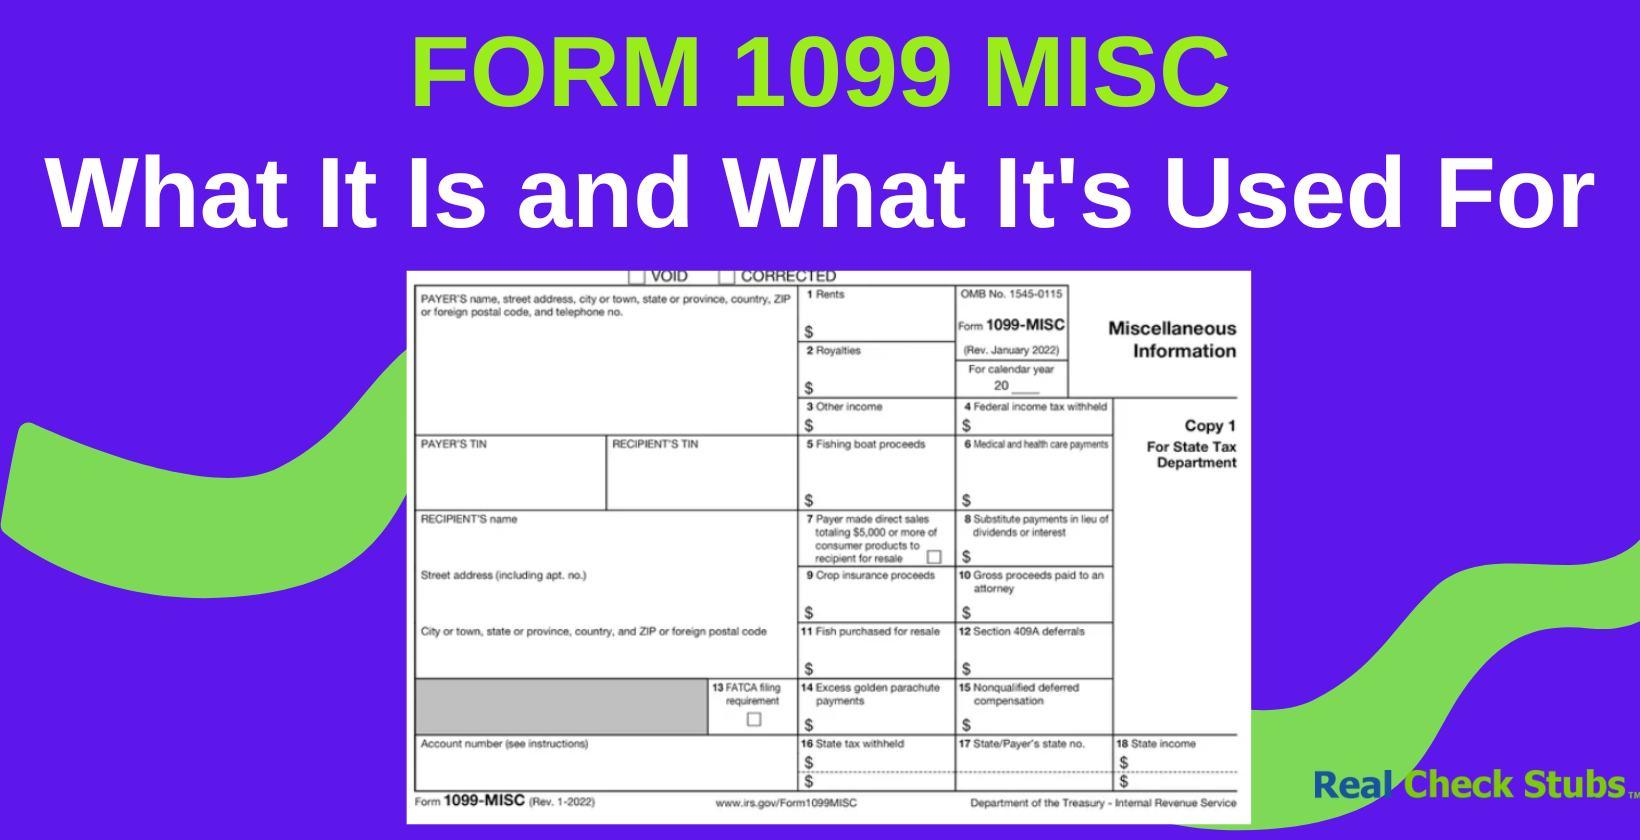 What is Form 1099-MISC?